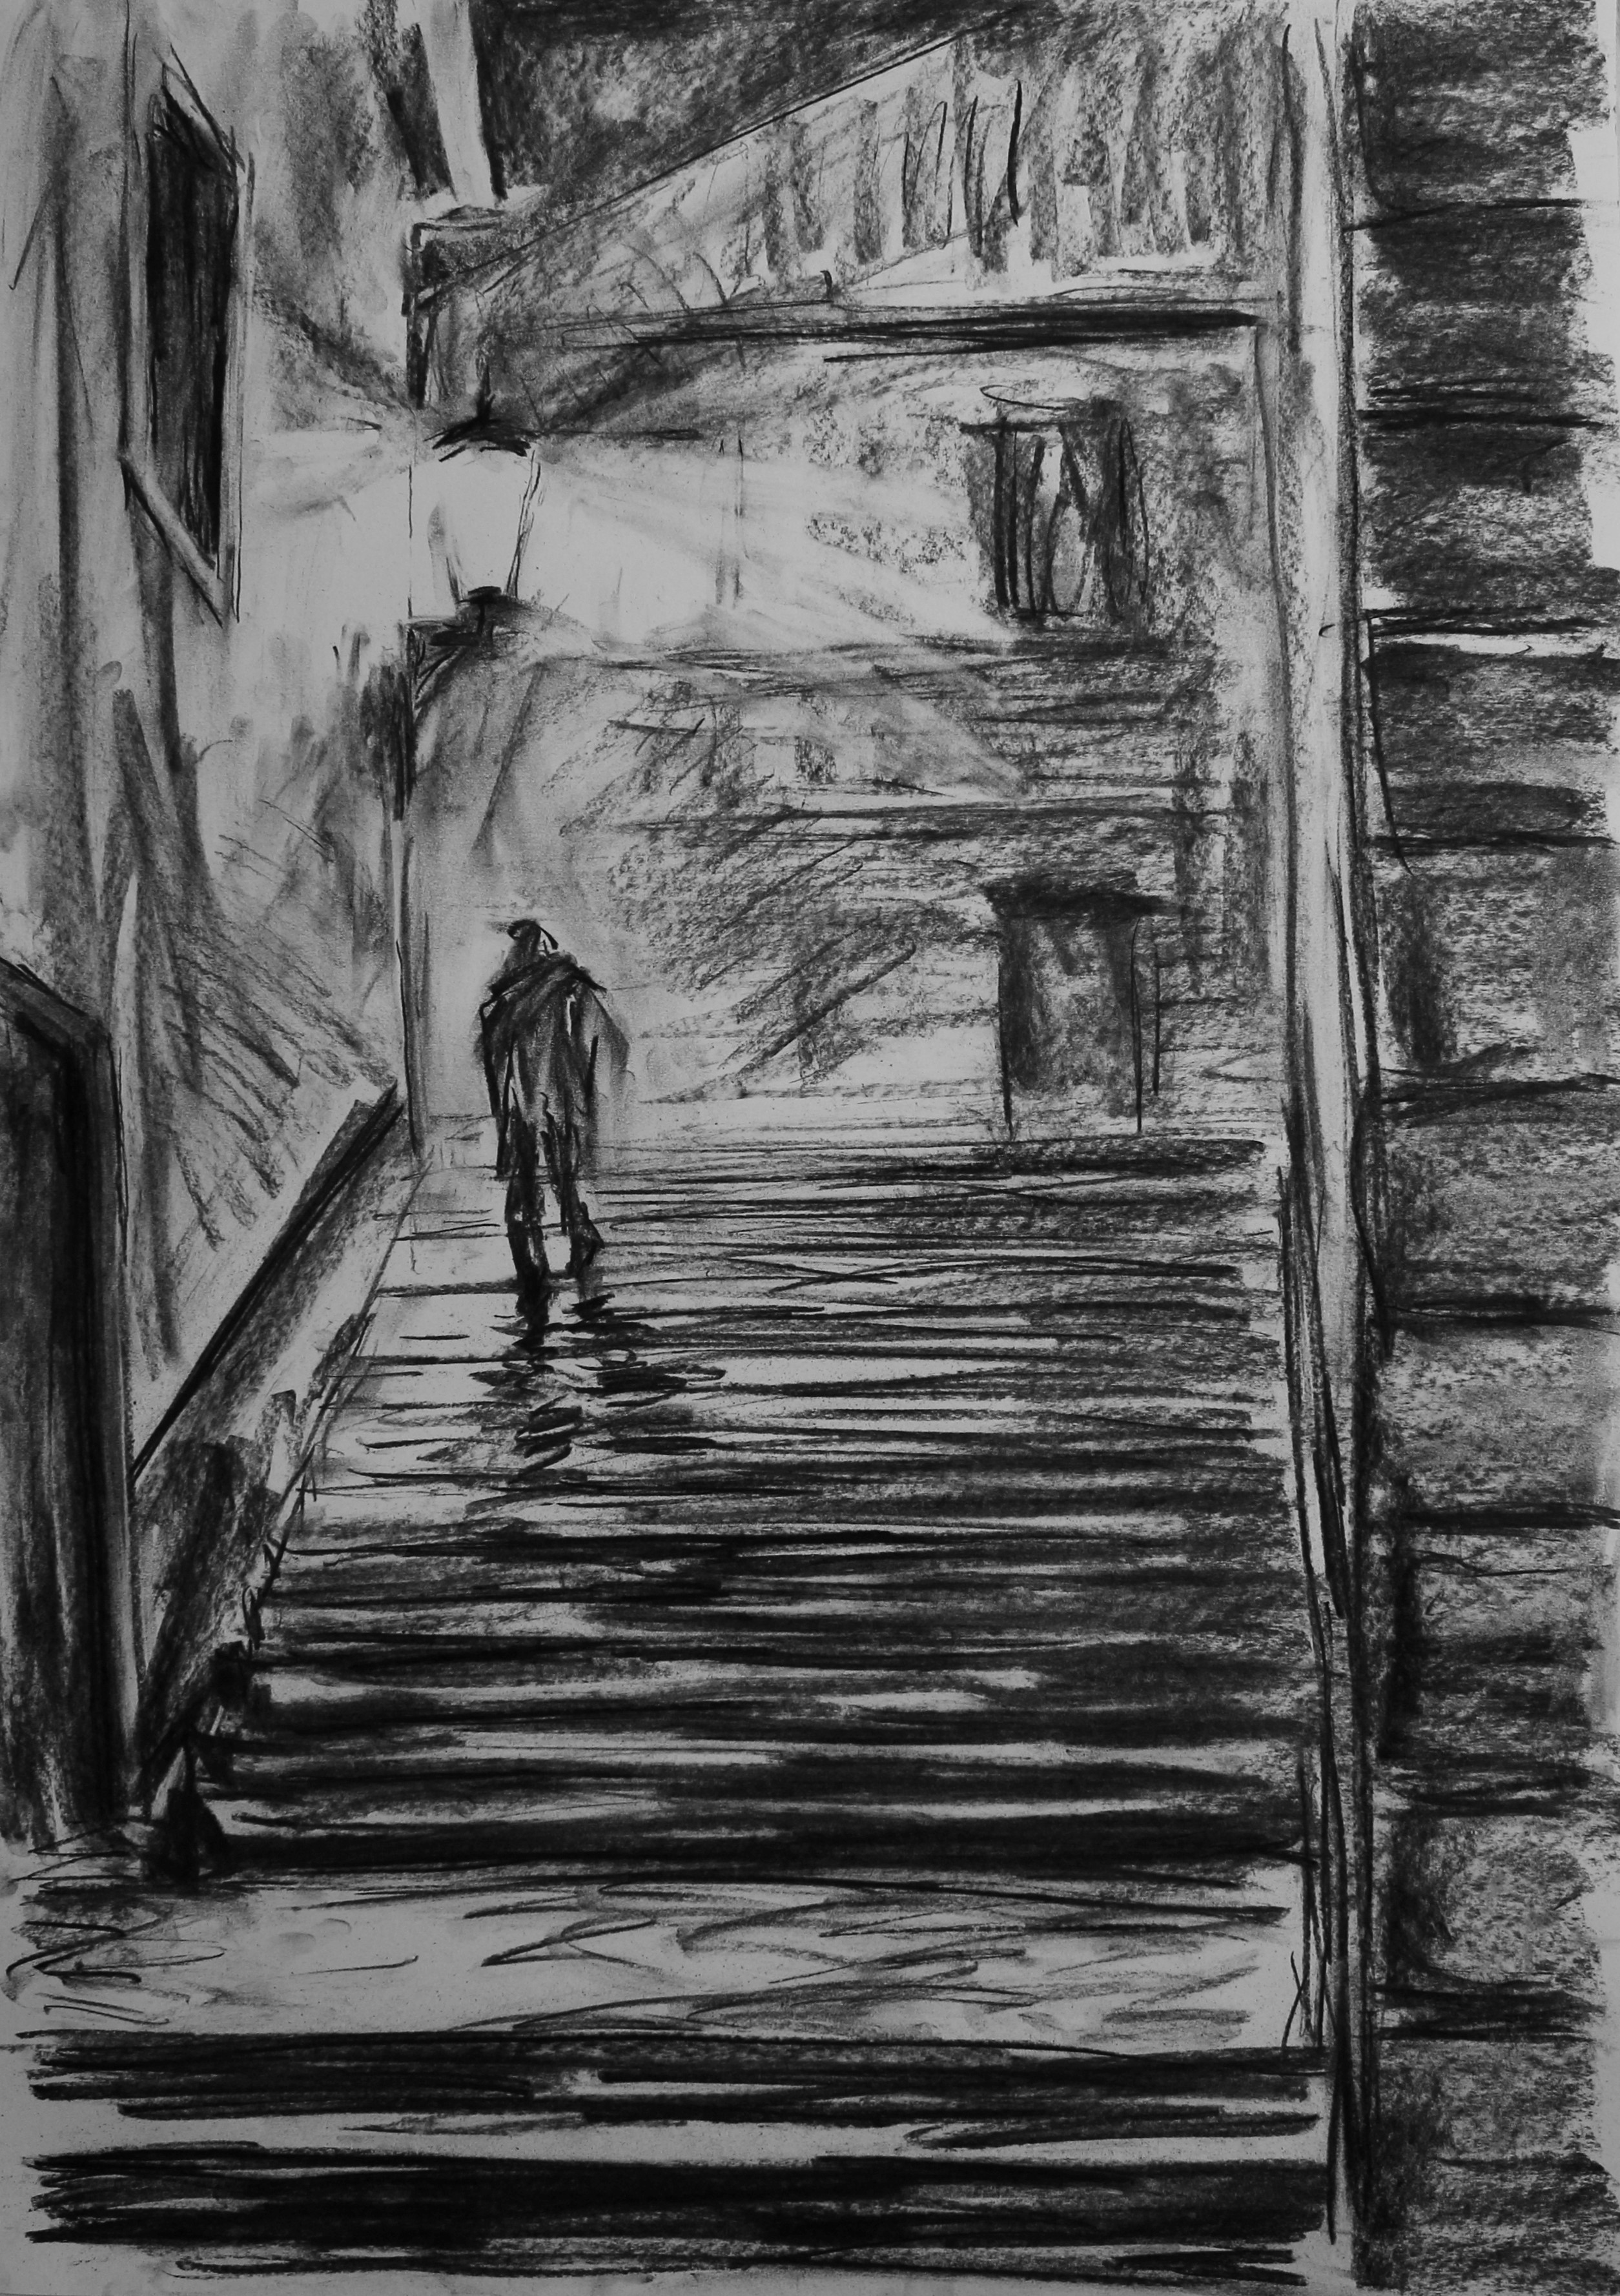 On stairs (84x59 cm)